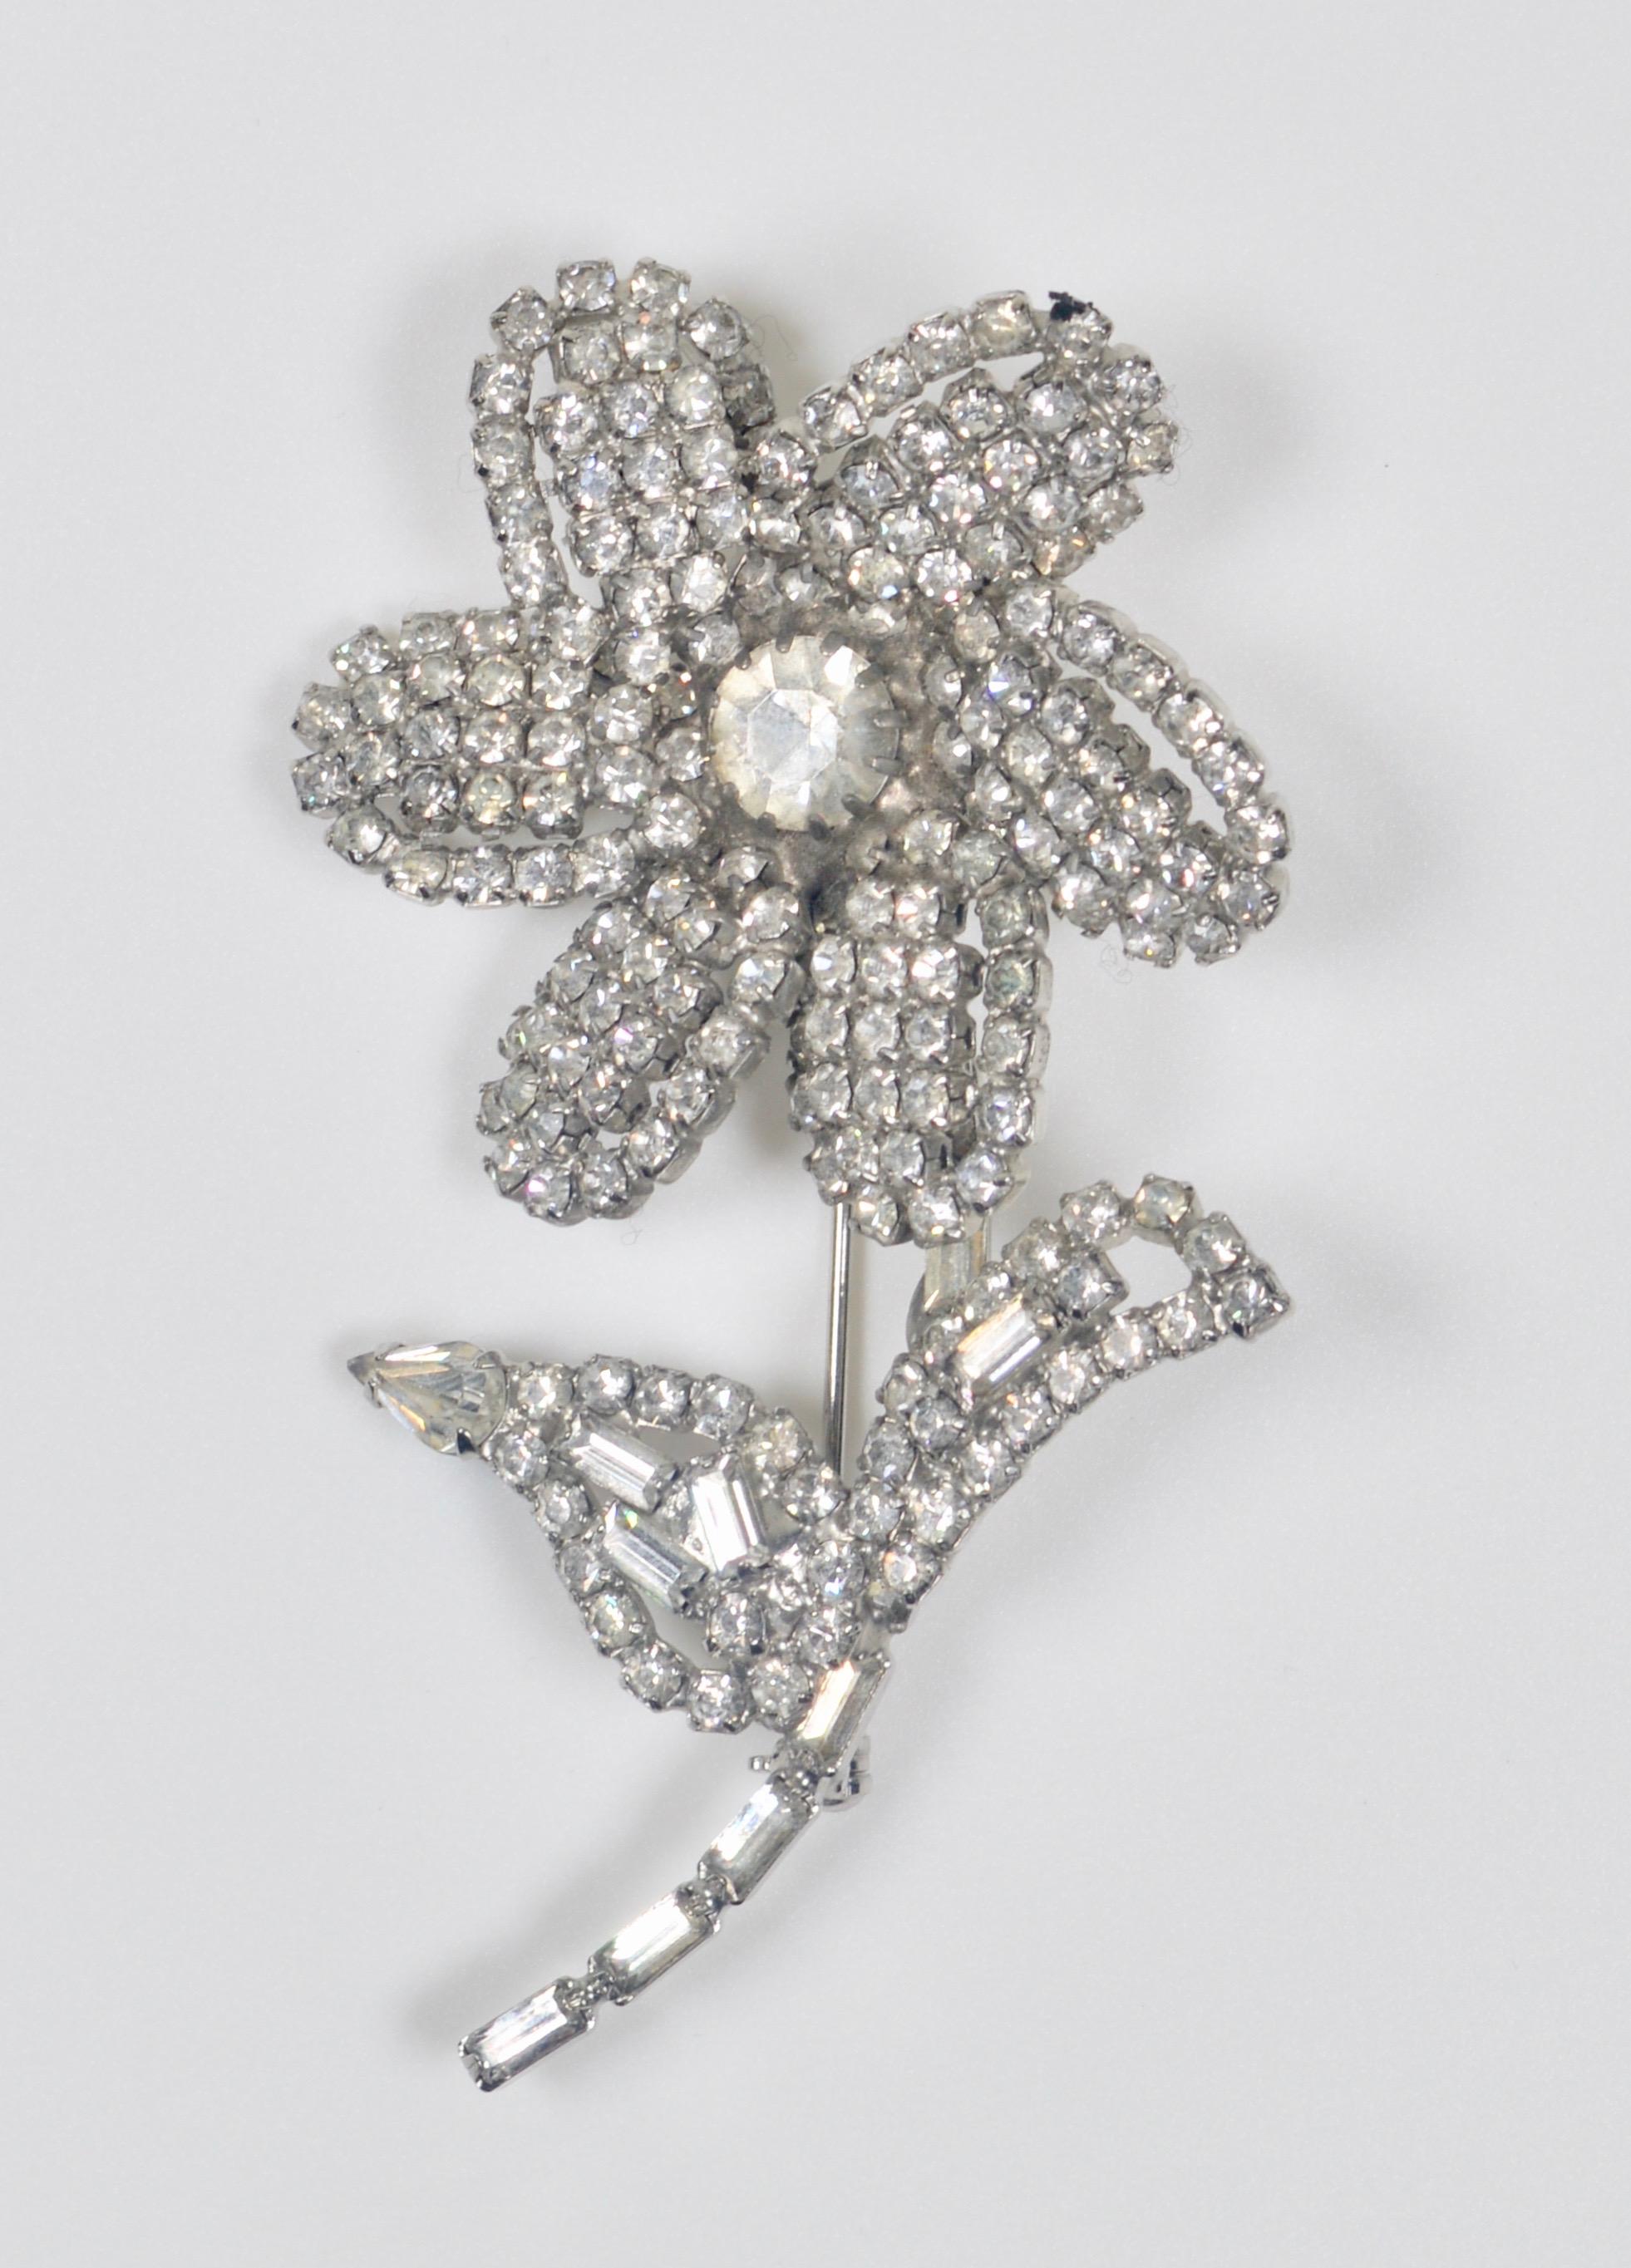 1960s Rhinestone Flower Brooch In Excellent Condition For Sale In London, GB